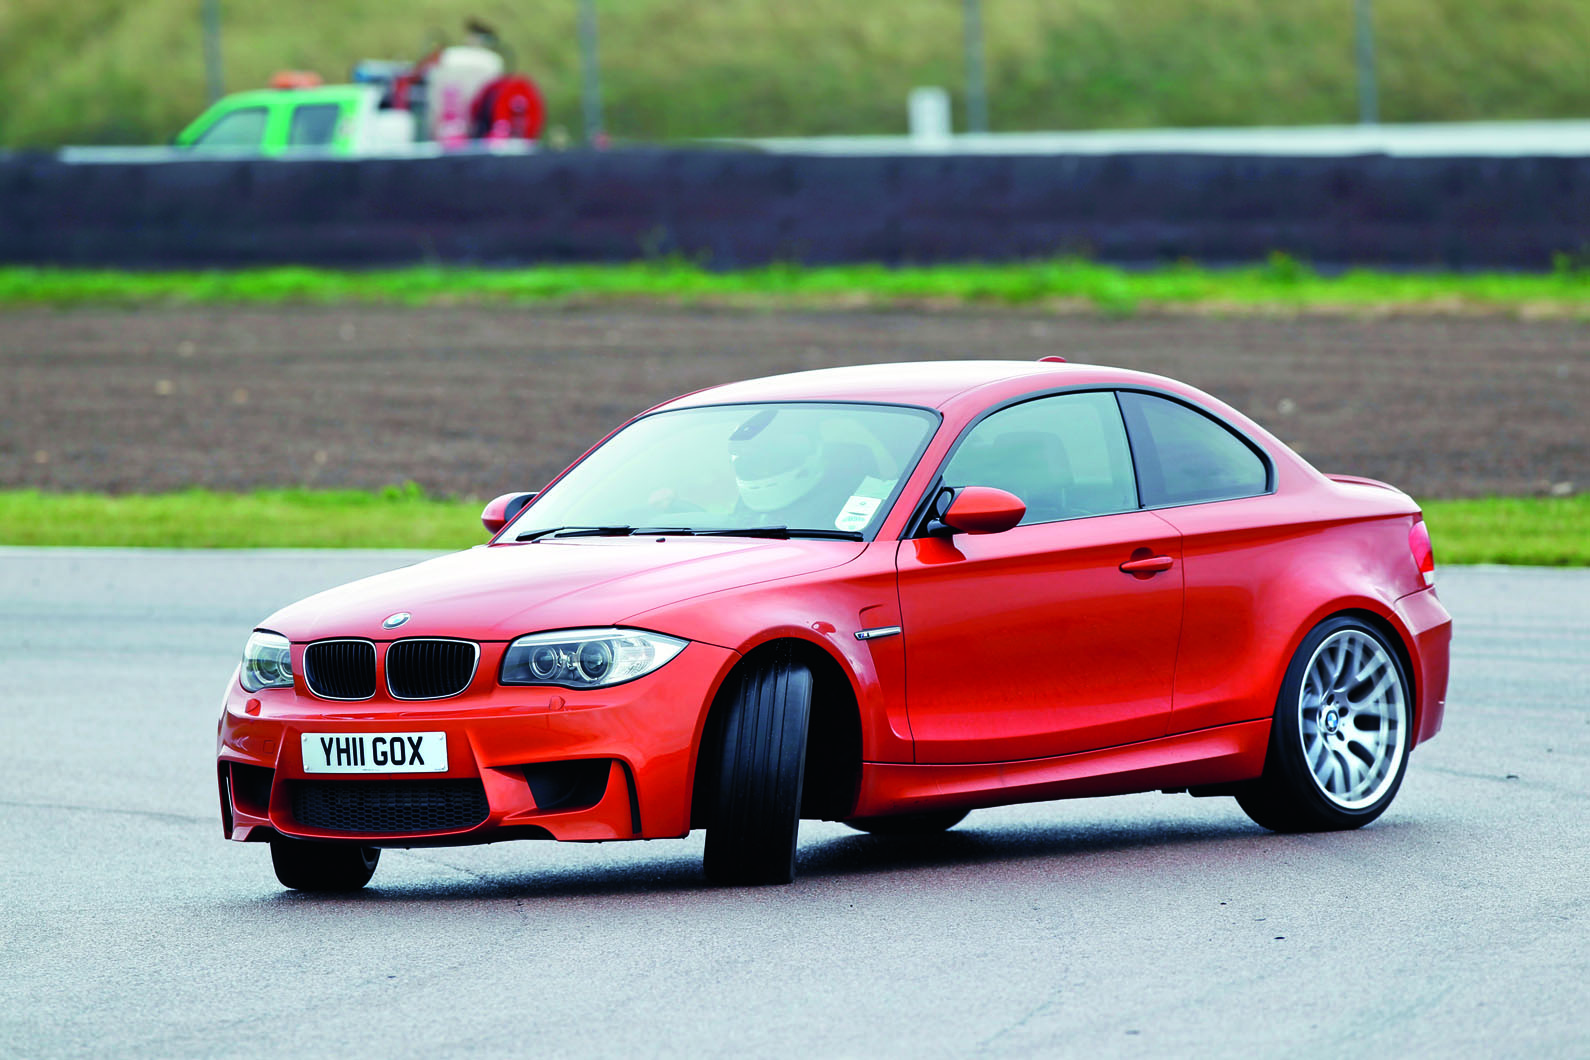 Used car buying guide: BMW 1 Series M Coupe | Autocar